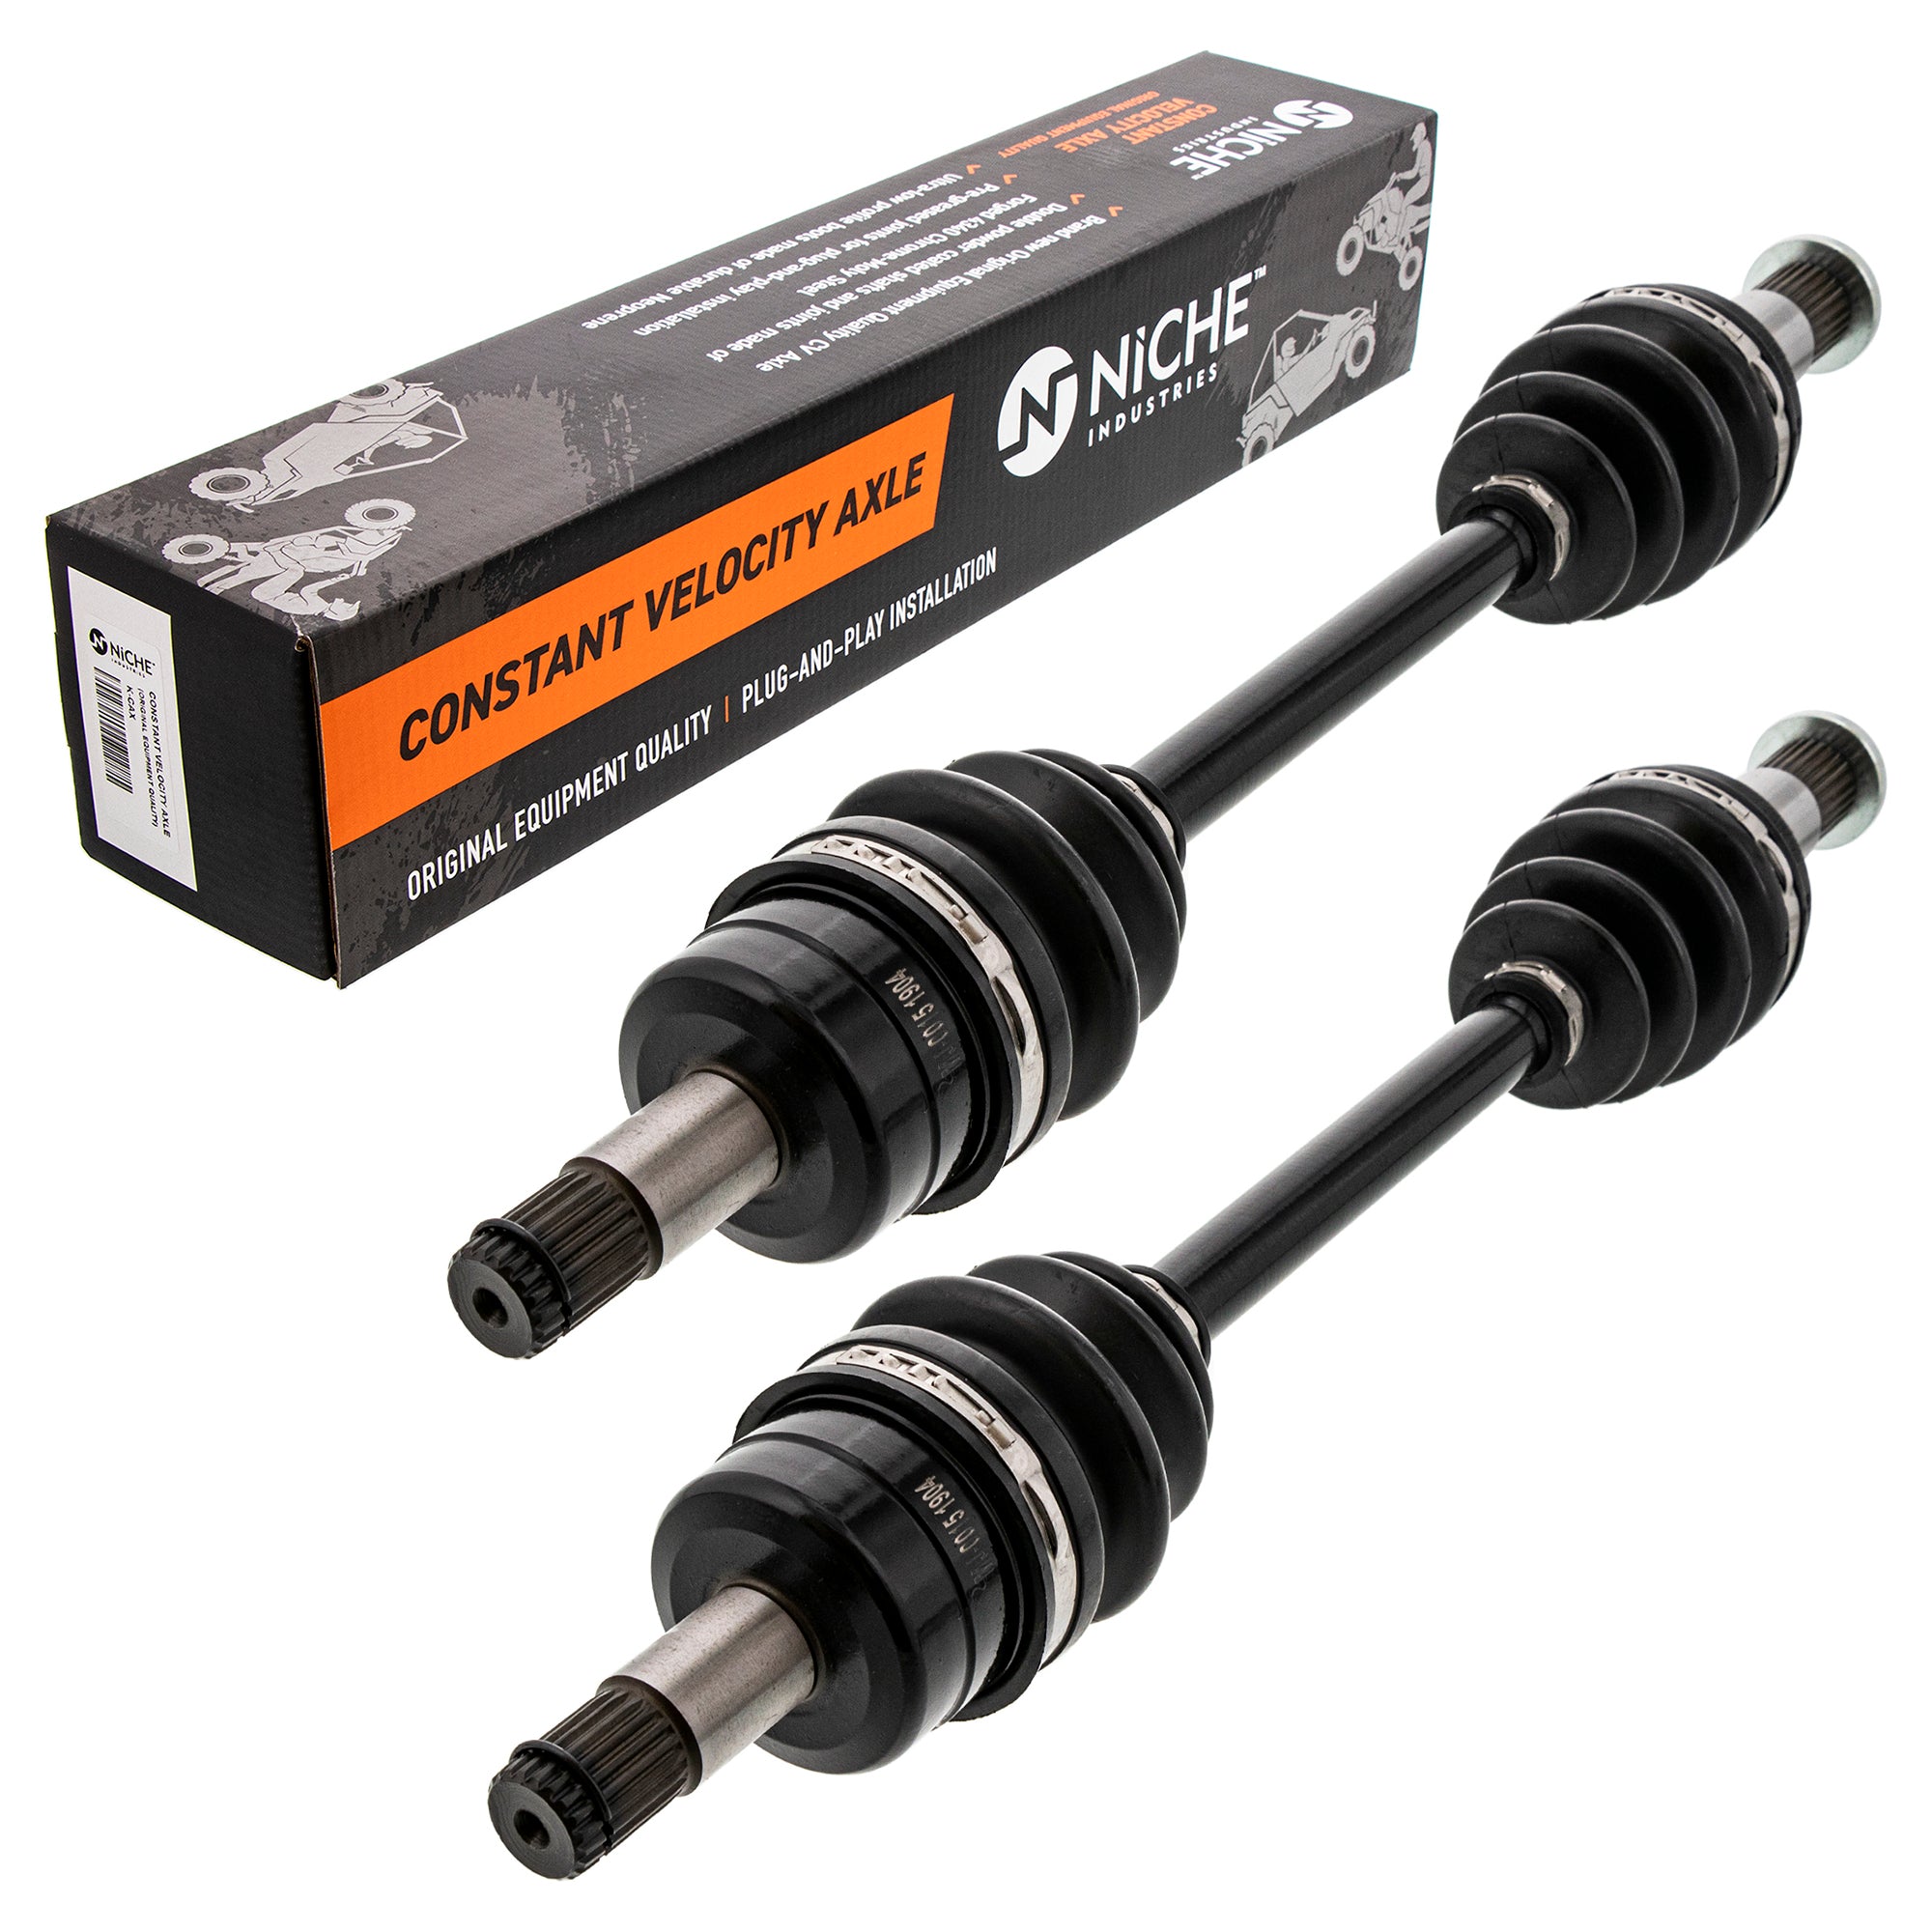 High Strength Front CV Axle Drive Shaft Set 2-Pack for zOTHER Grizzly 2BG-2518E-00-00 NICHE 519-KCA2237X